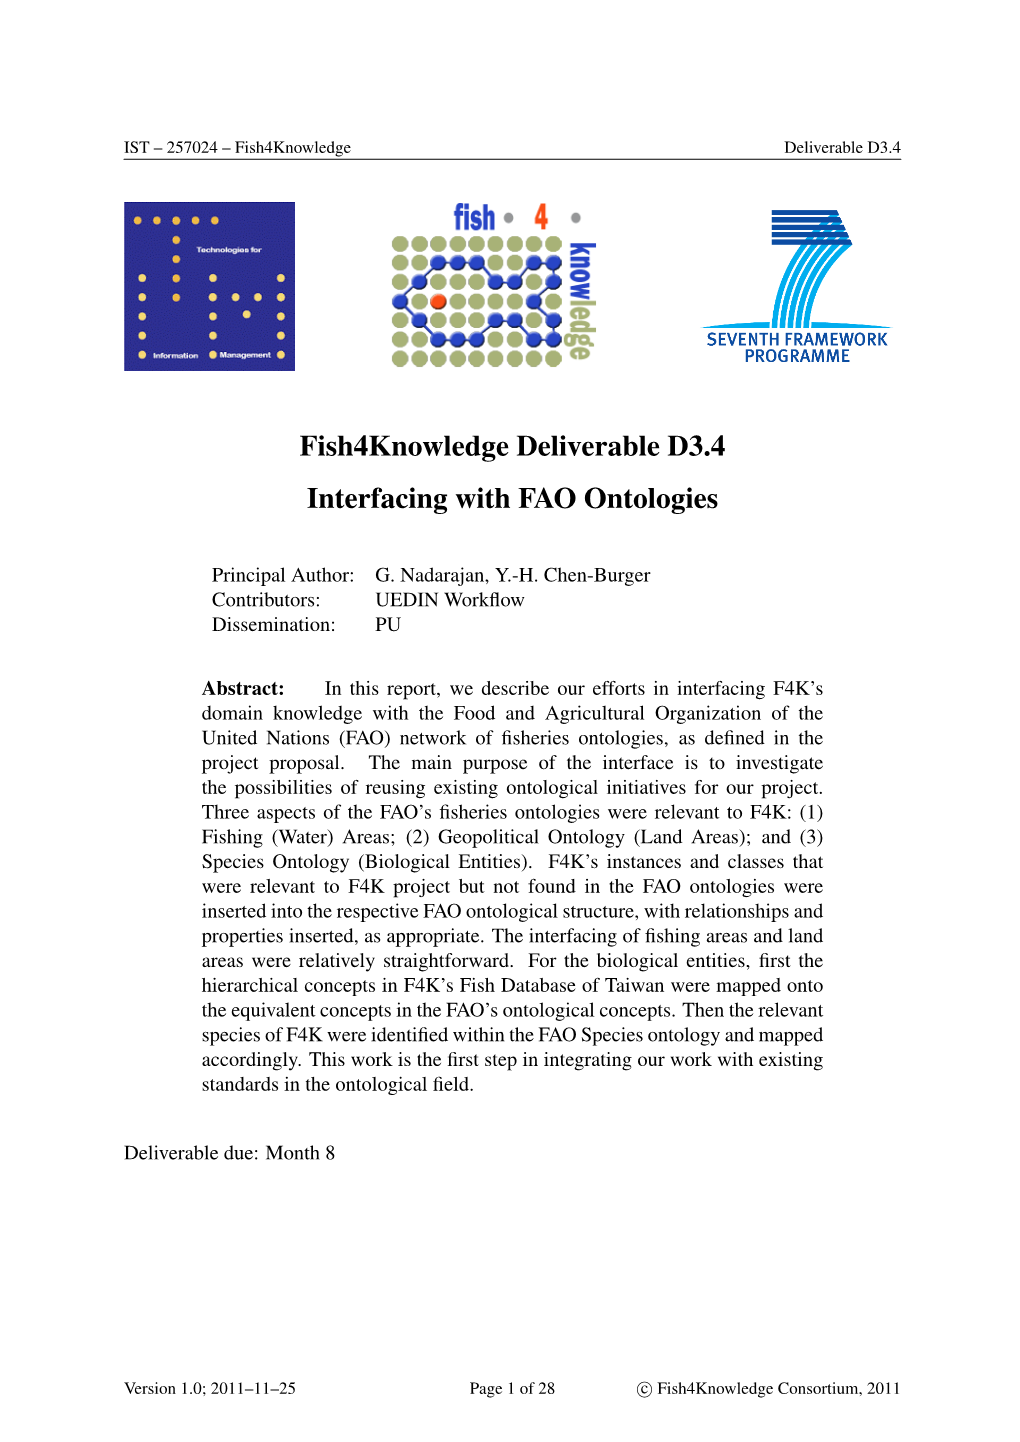 Fish4knowledge Deliverable D3.4 Interfacing with FAO Ontologies